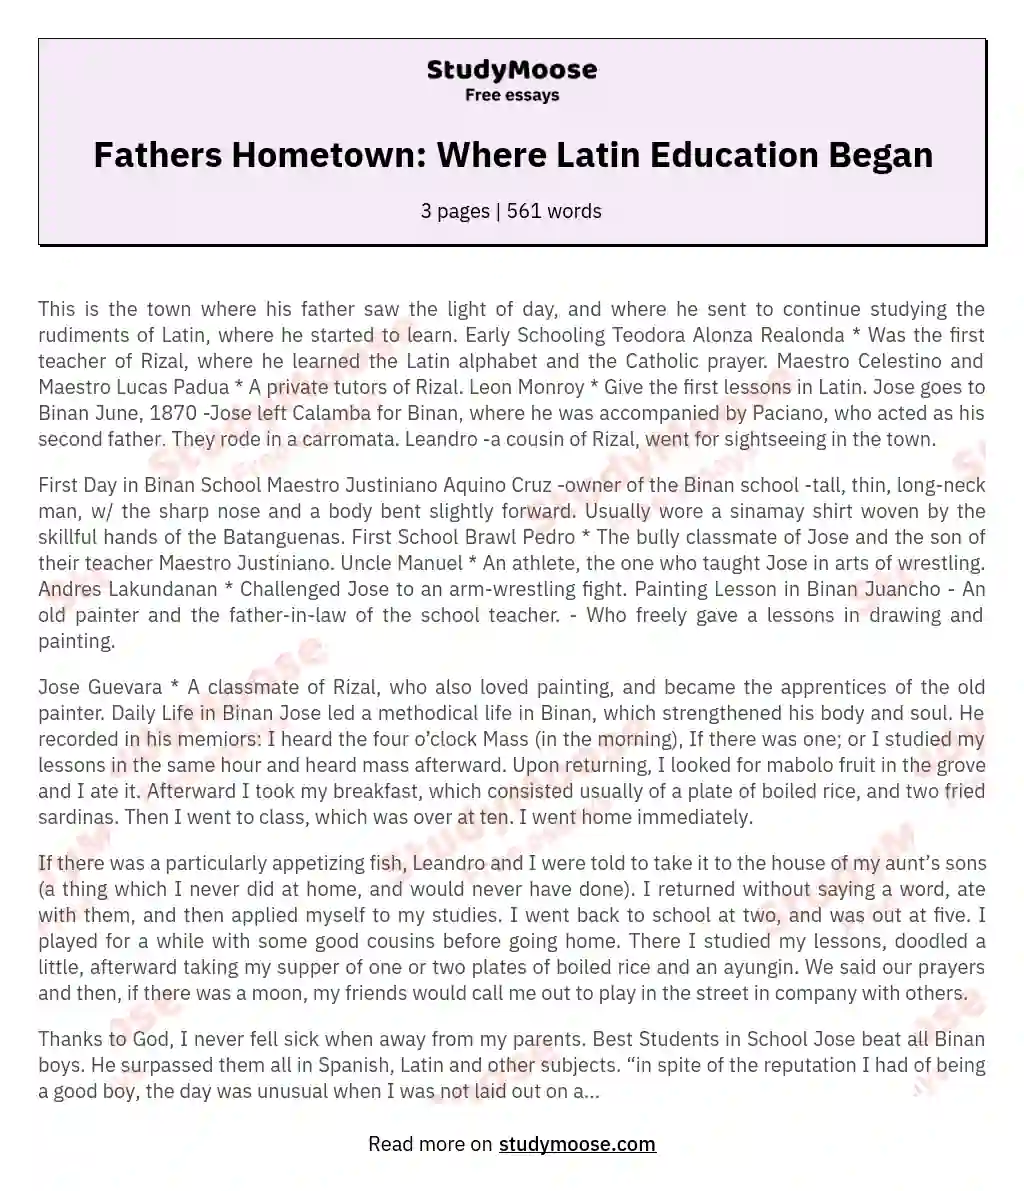 Fathers Hometown: Where Latin Education Began essay